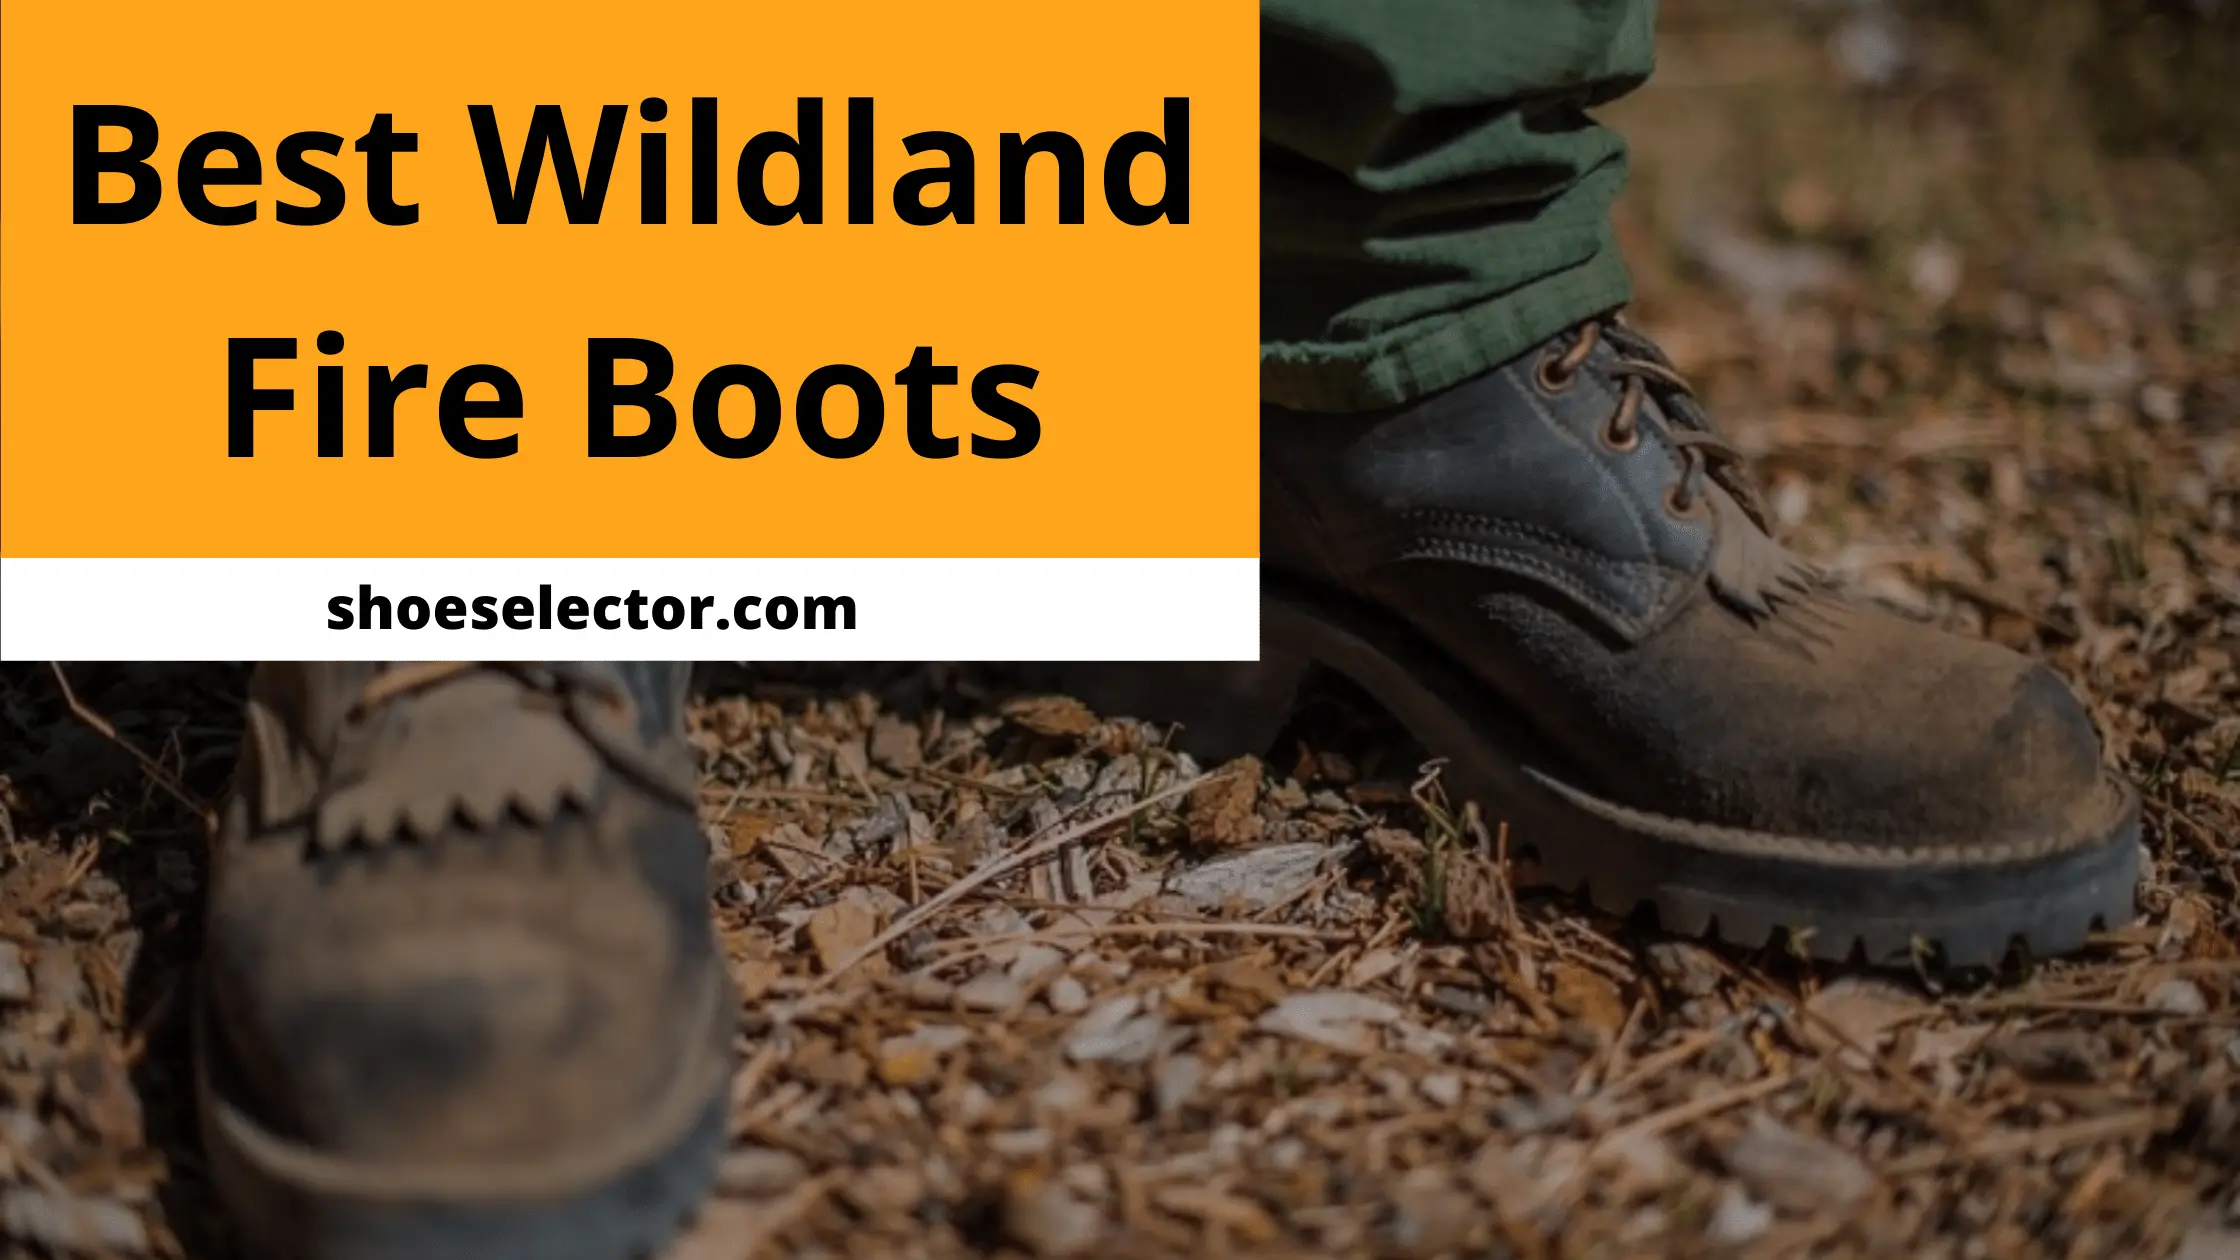 Best Wildland Fire Boots - Supportive And Stylish